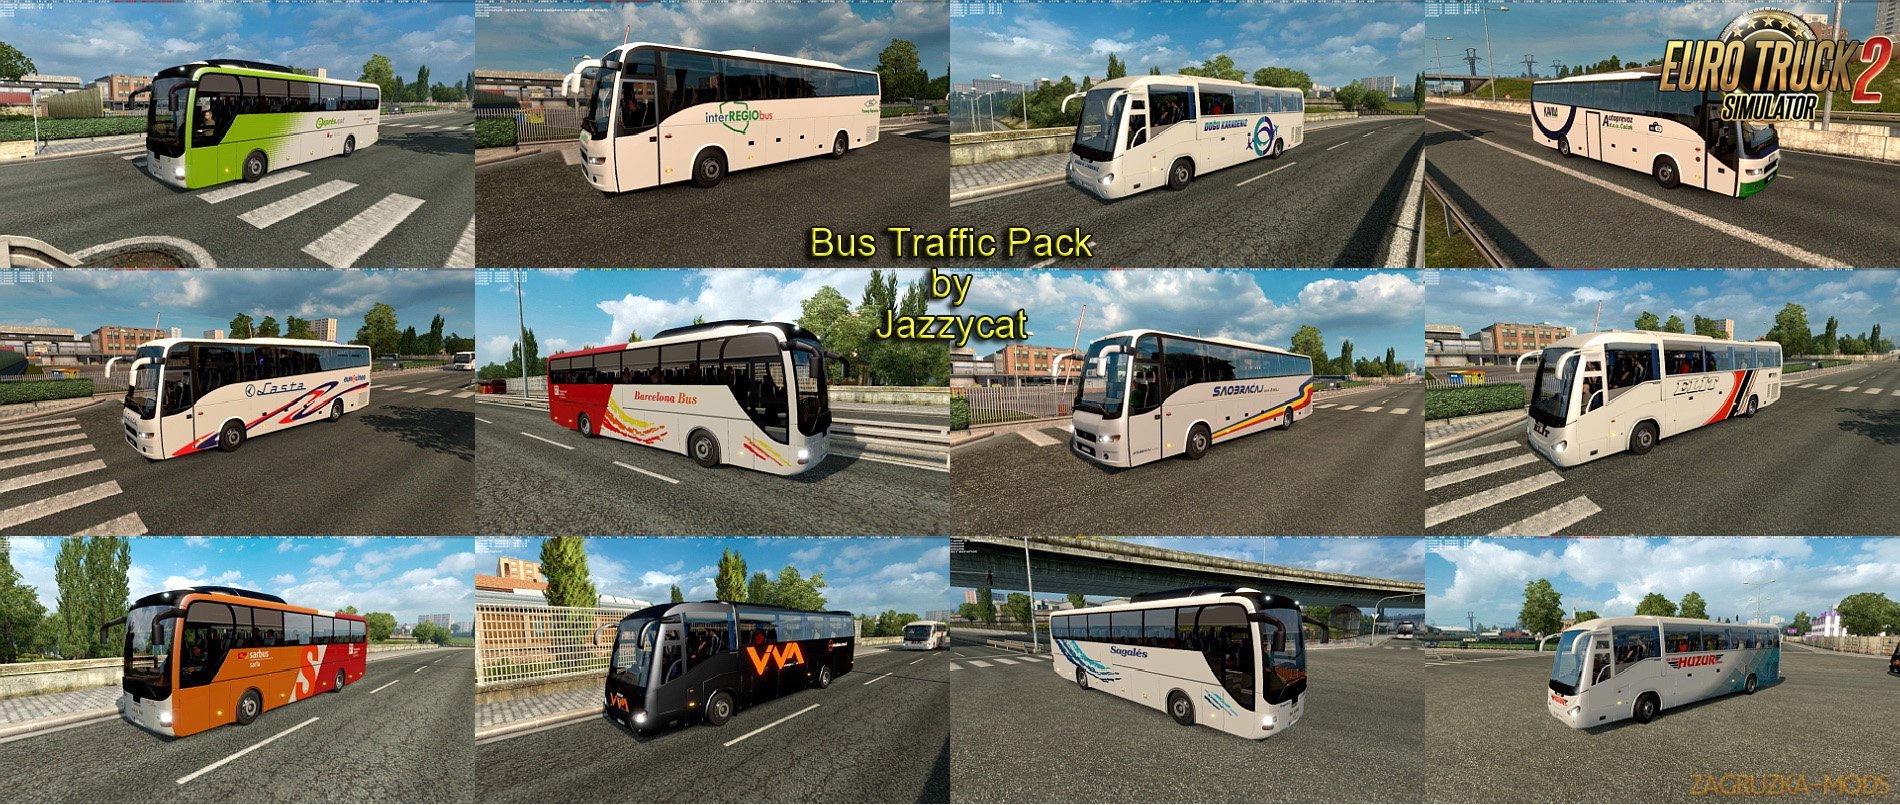 Bus Traffic Pack v2.0 by Jazzycat